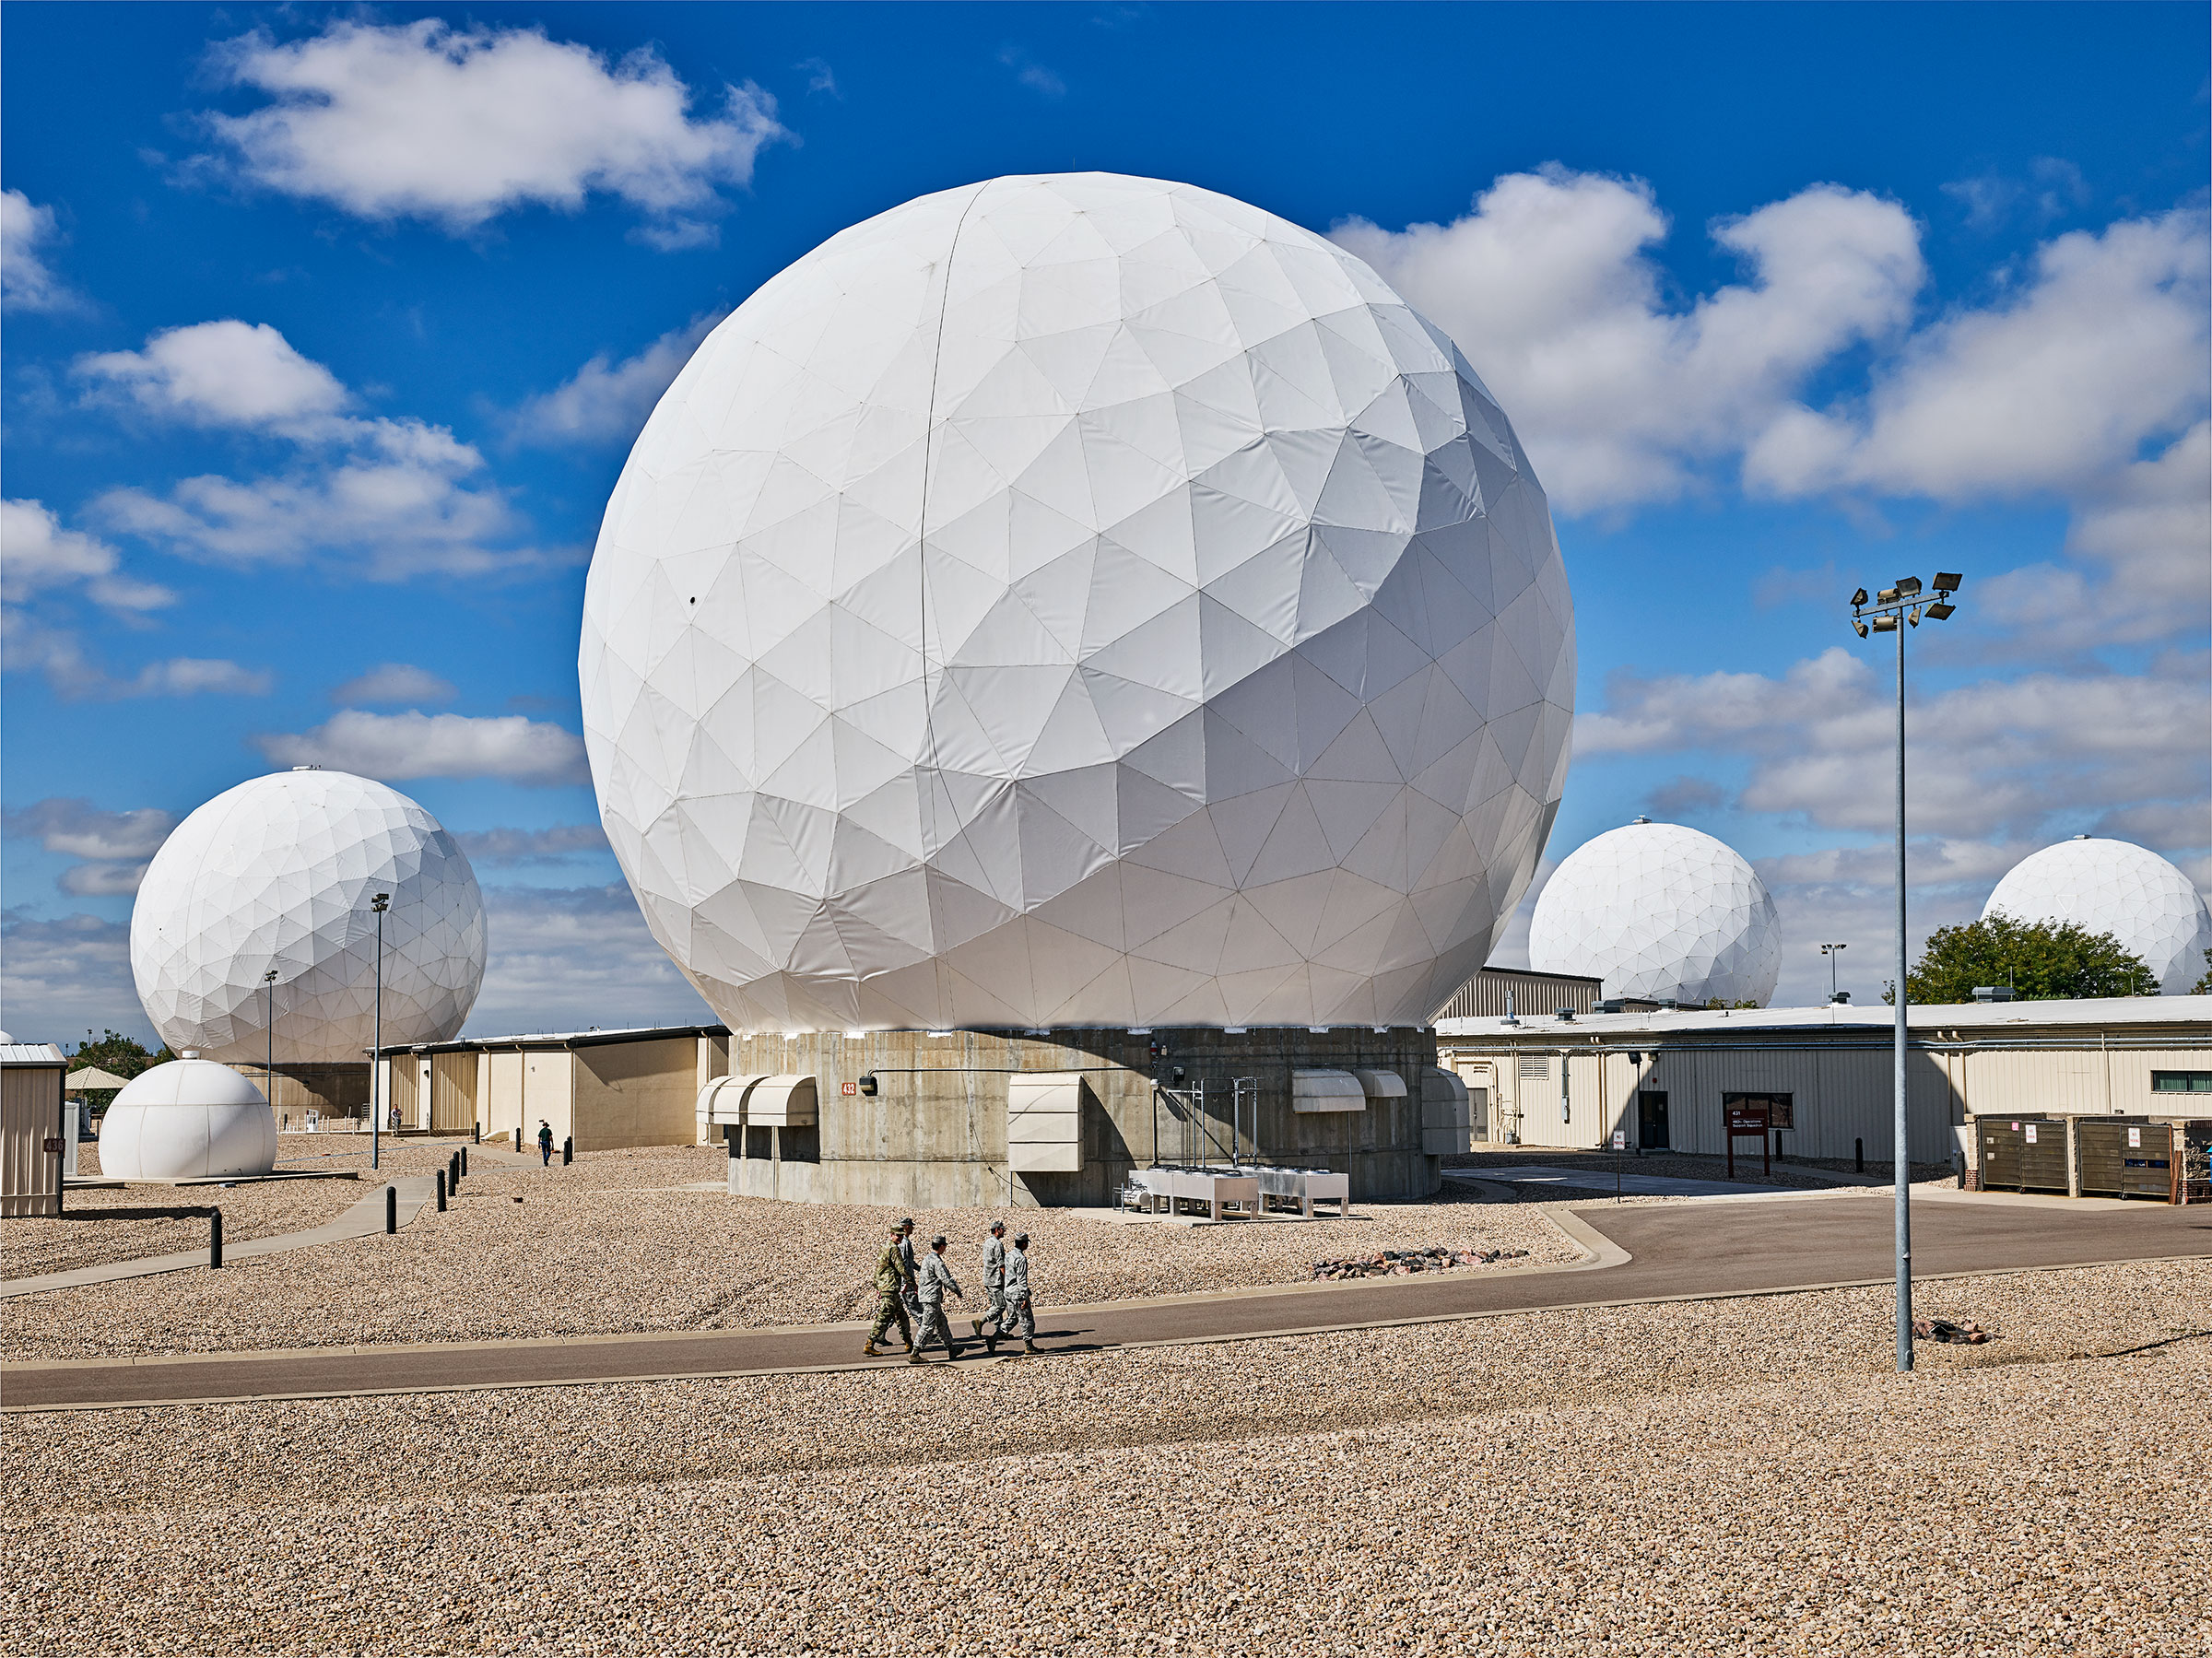 Radomes, called “golf balls,” at Buckley Air Force Base in Colorado protect 60-ft. military satellite dishes. (Spencer Lowell for TIME)